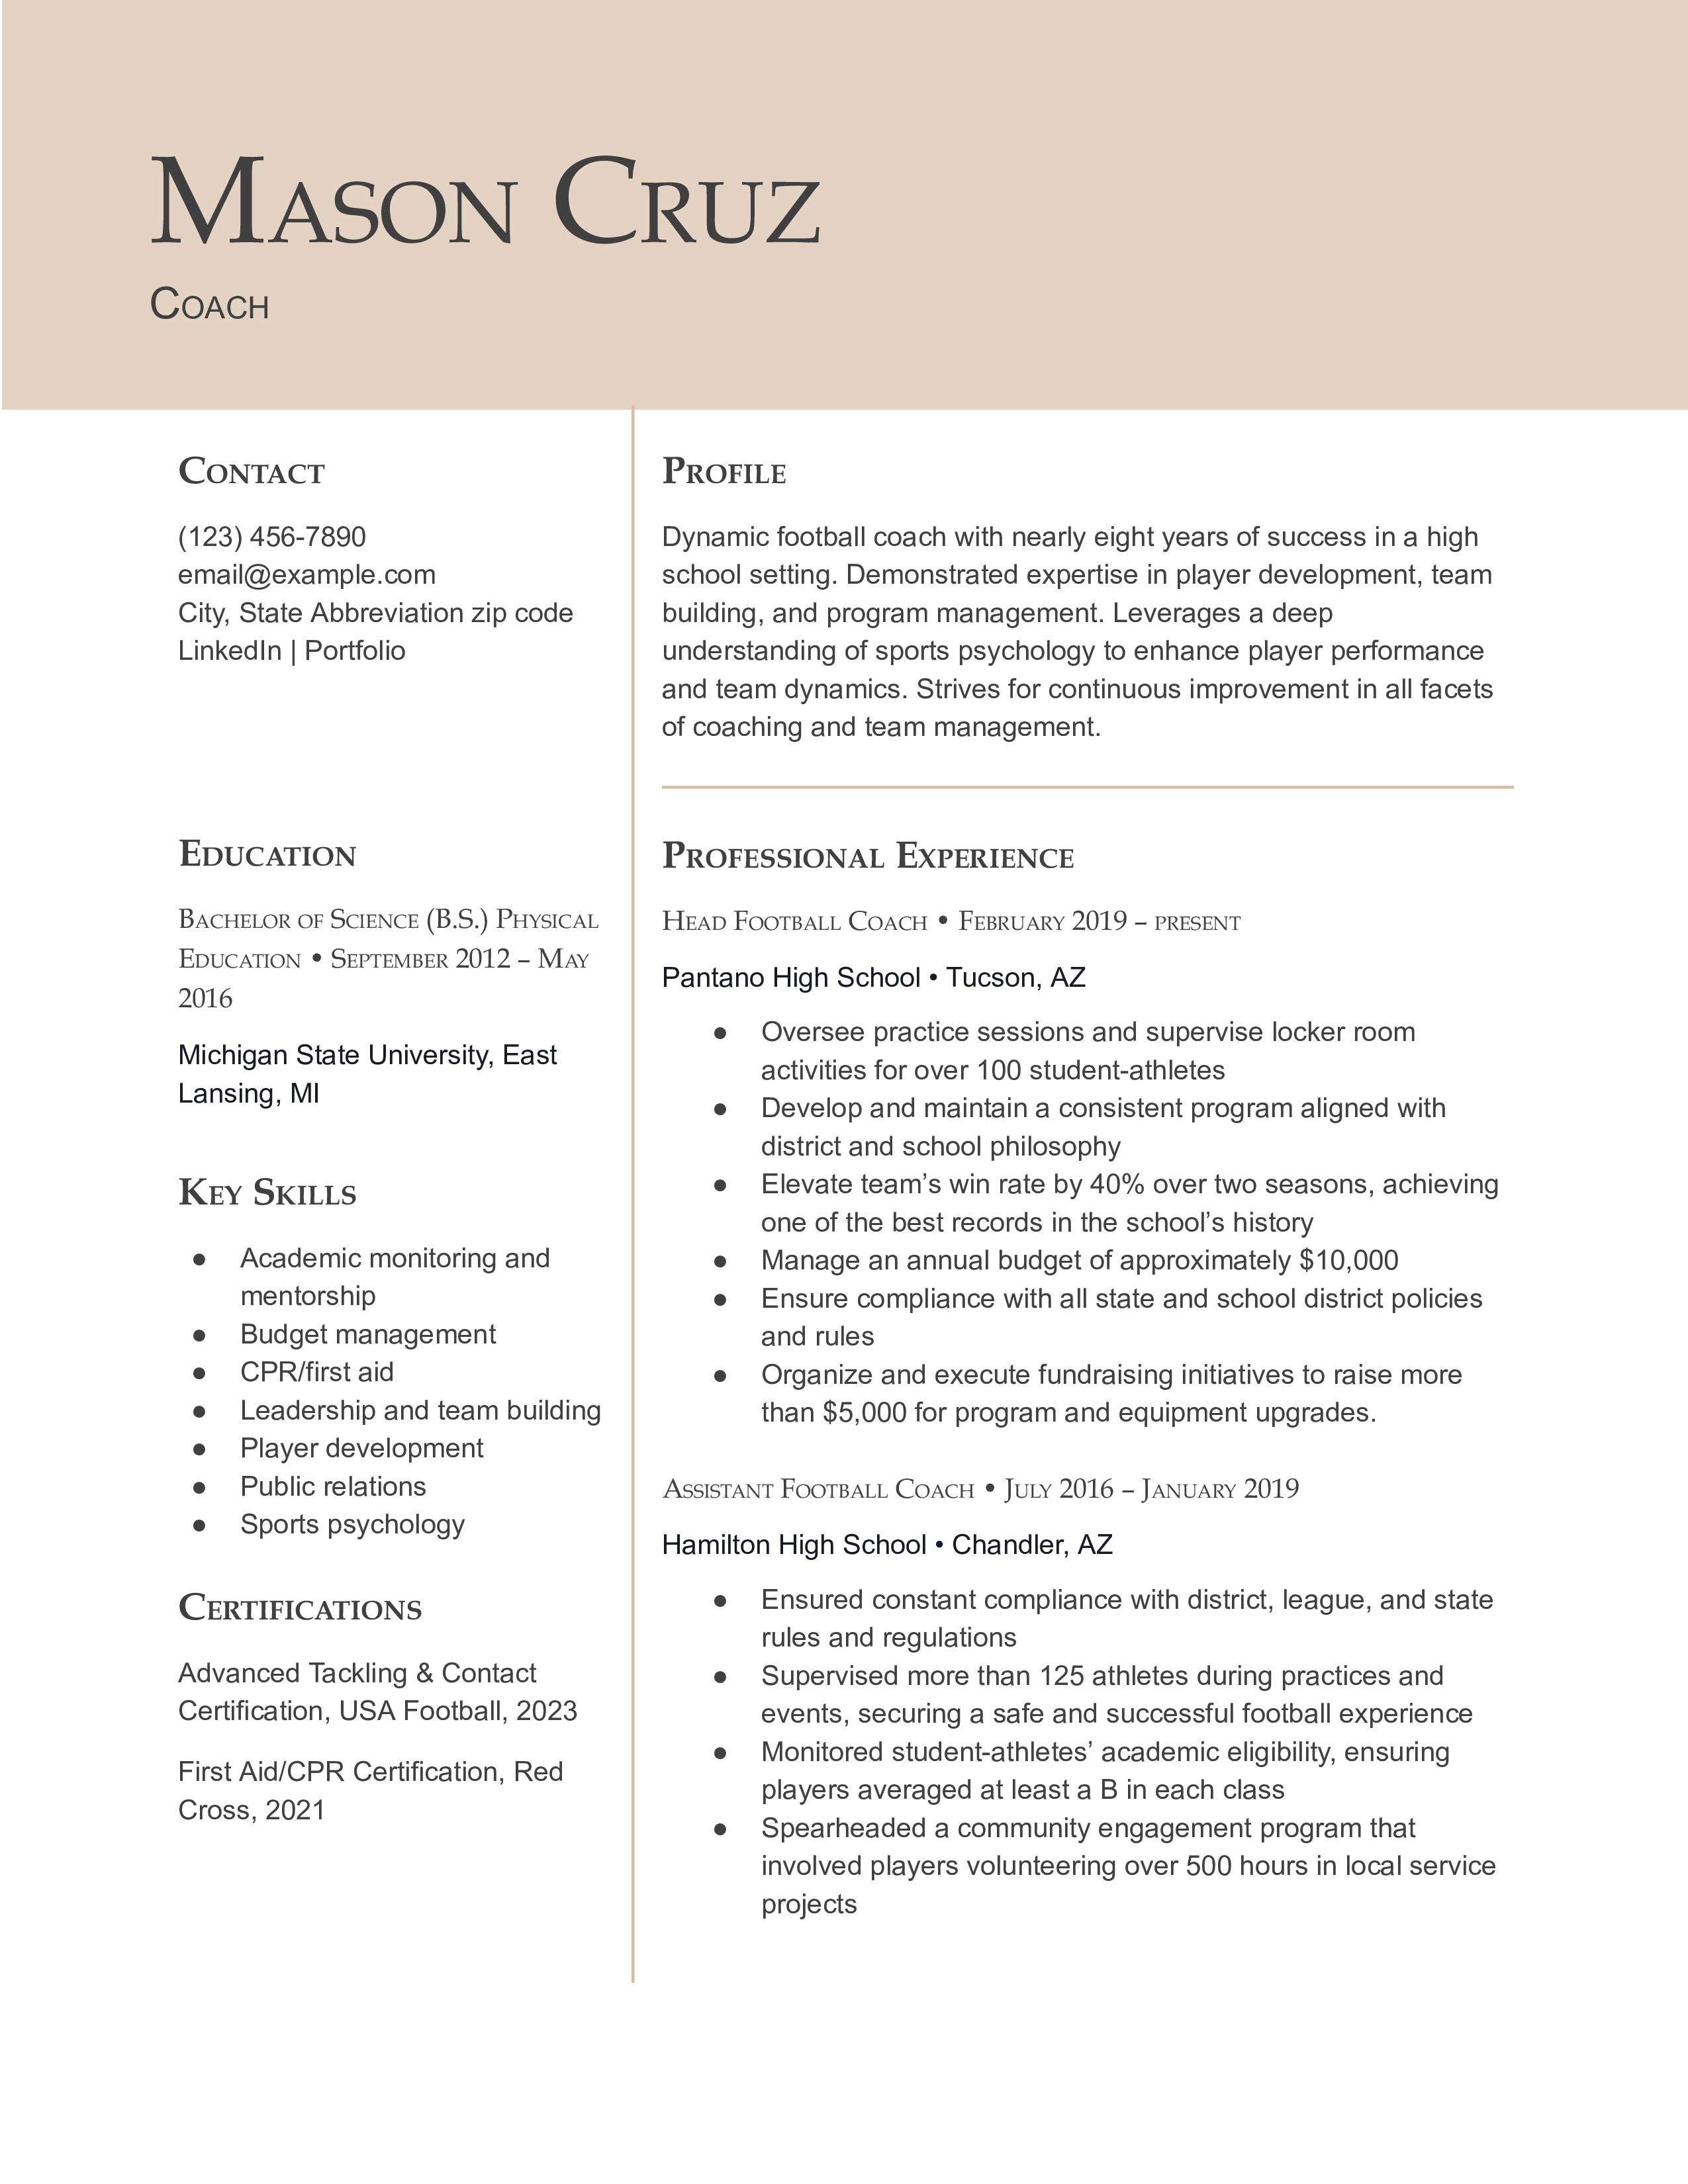 Coaching Resume Templates and Examples.docx